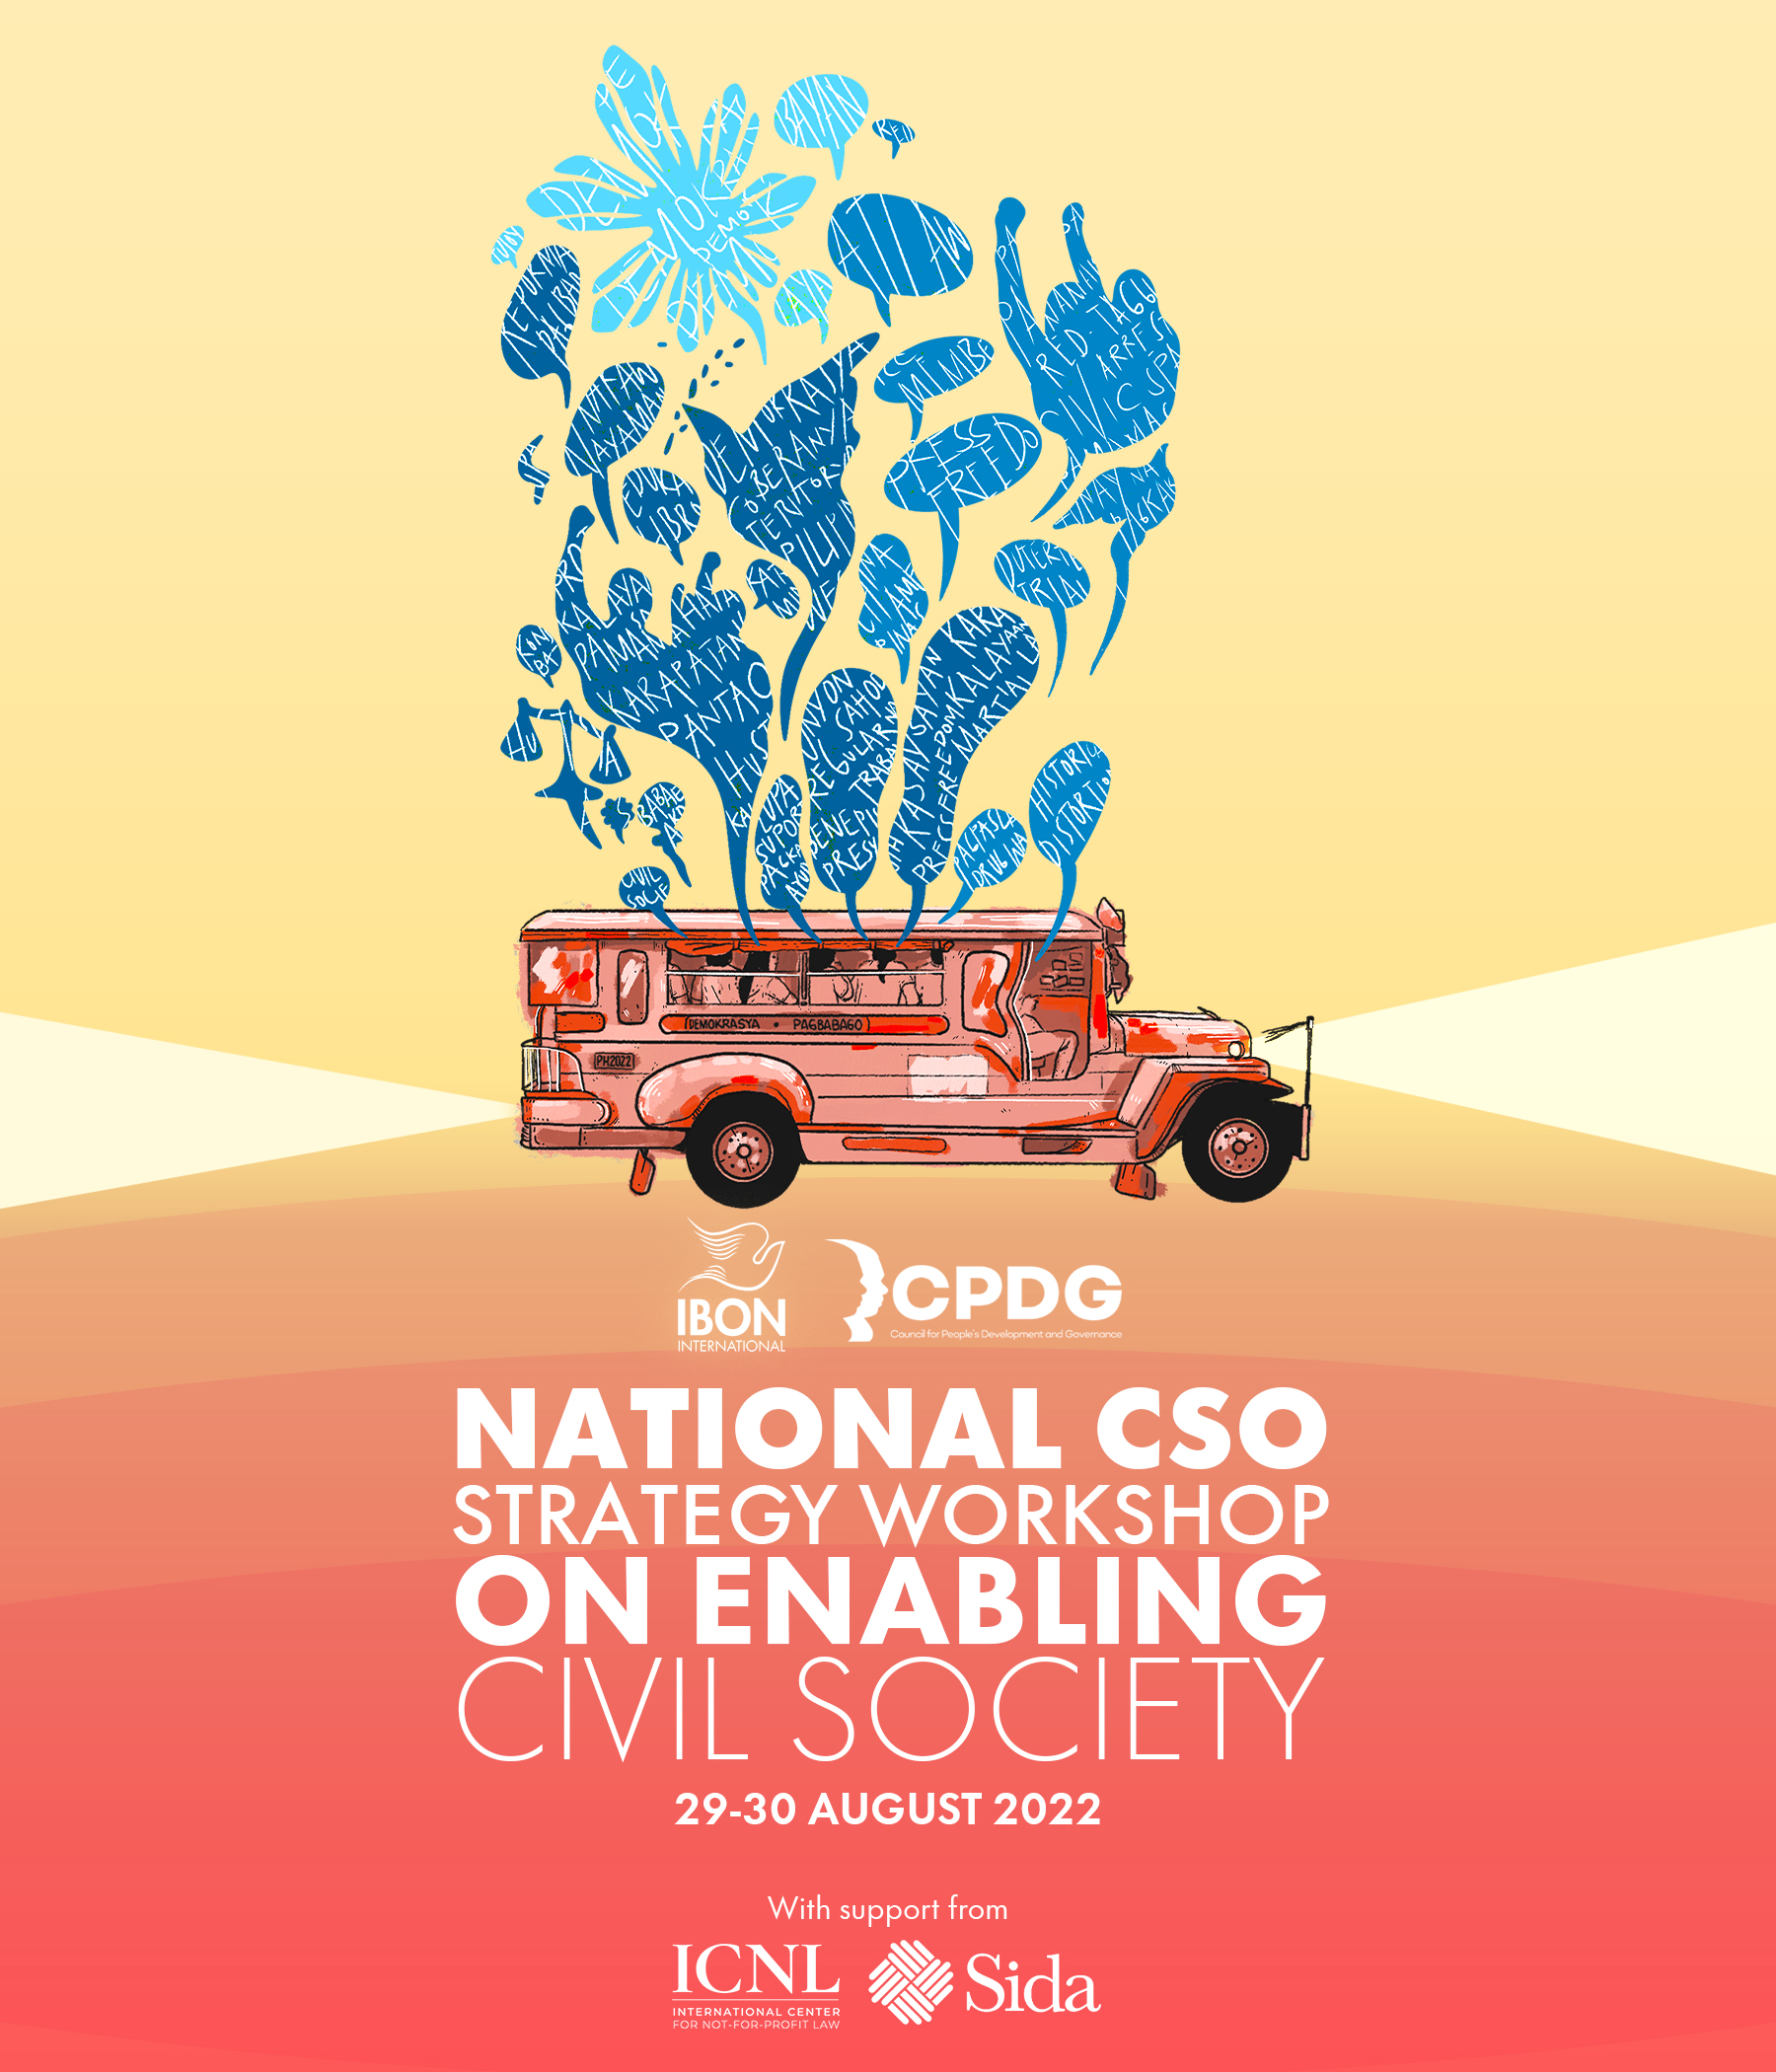 [EVENT] National CSO Strategy Workshop on Enabling Civil Society